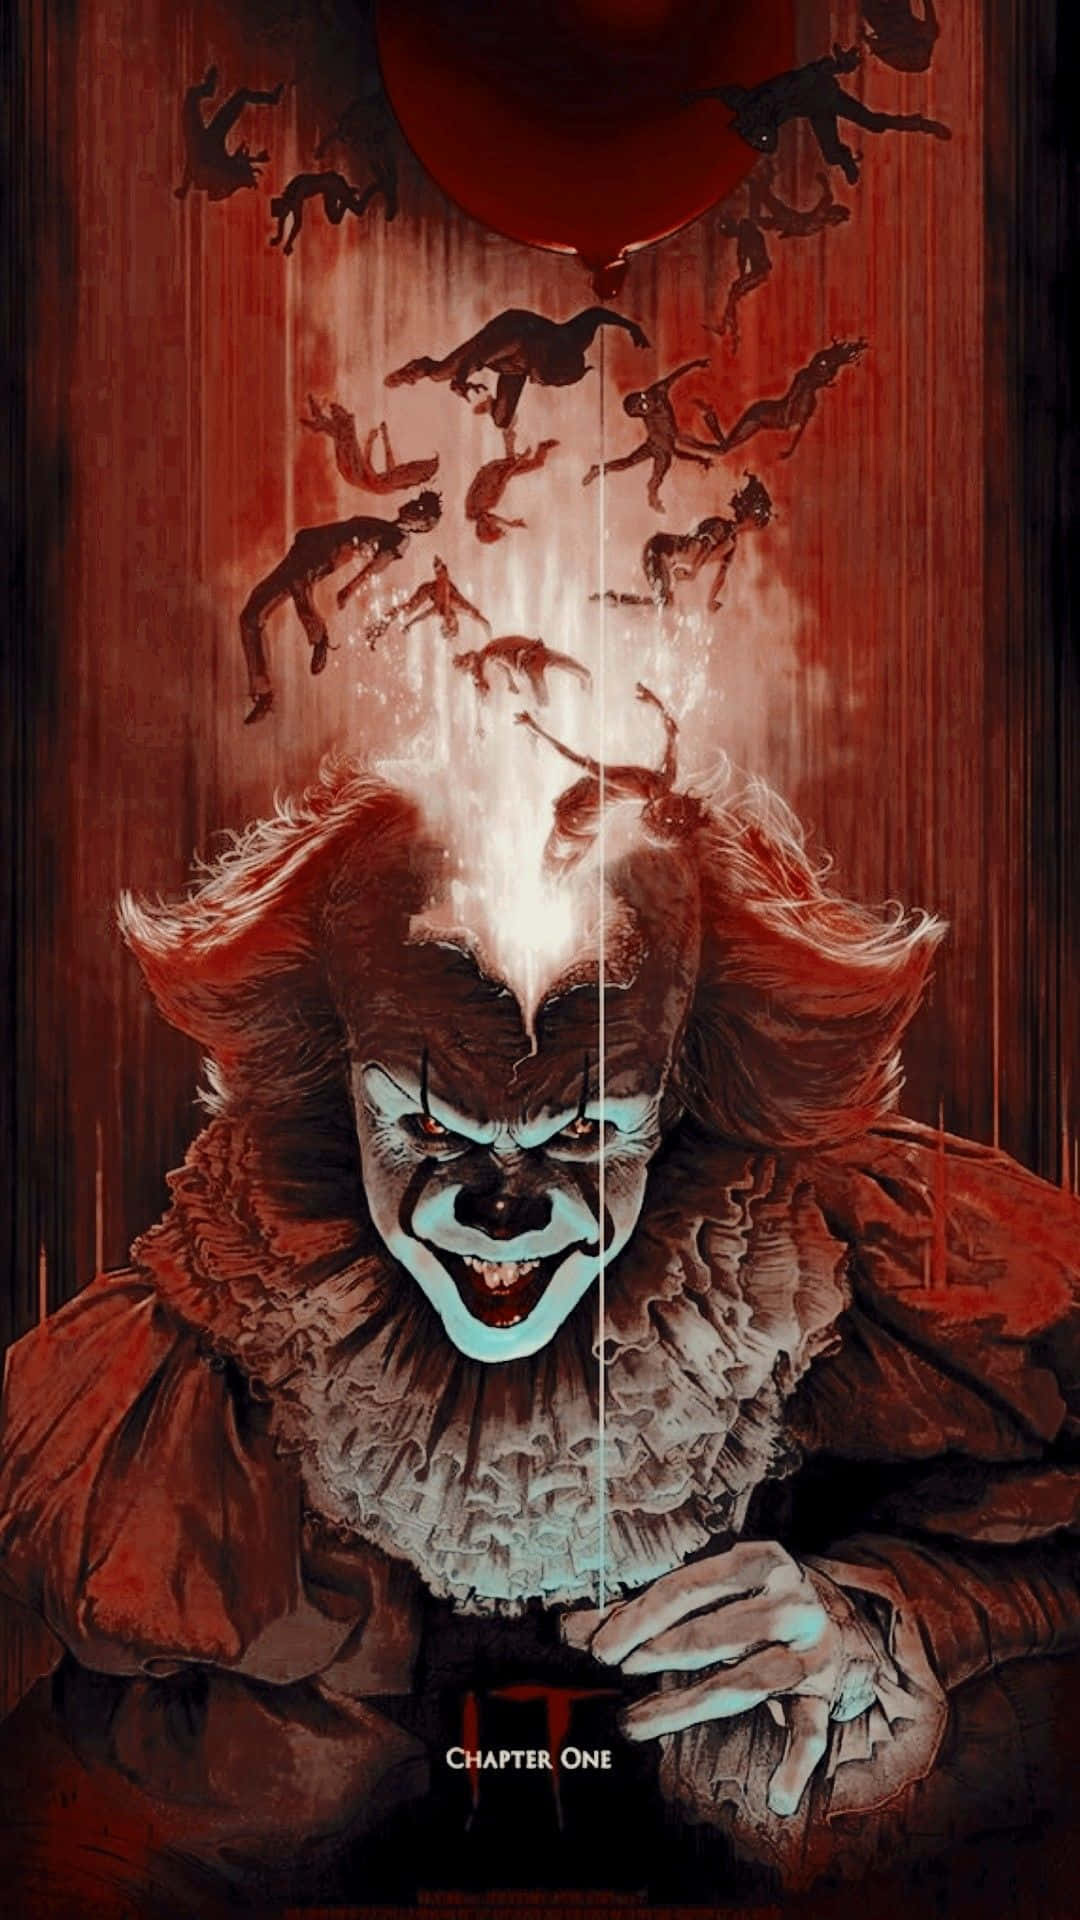 Download It Pennywise 720p X264 Dvdrip Wallpaper